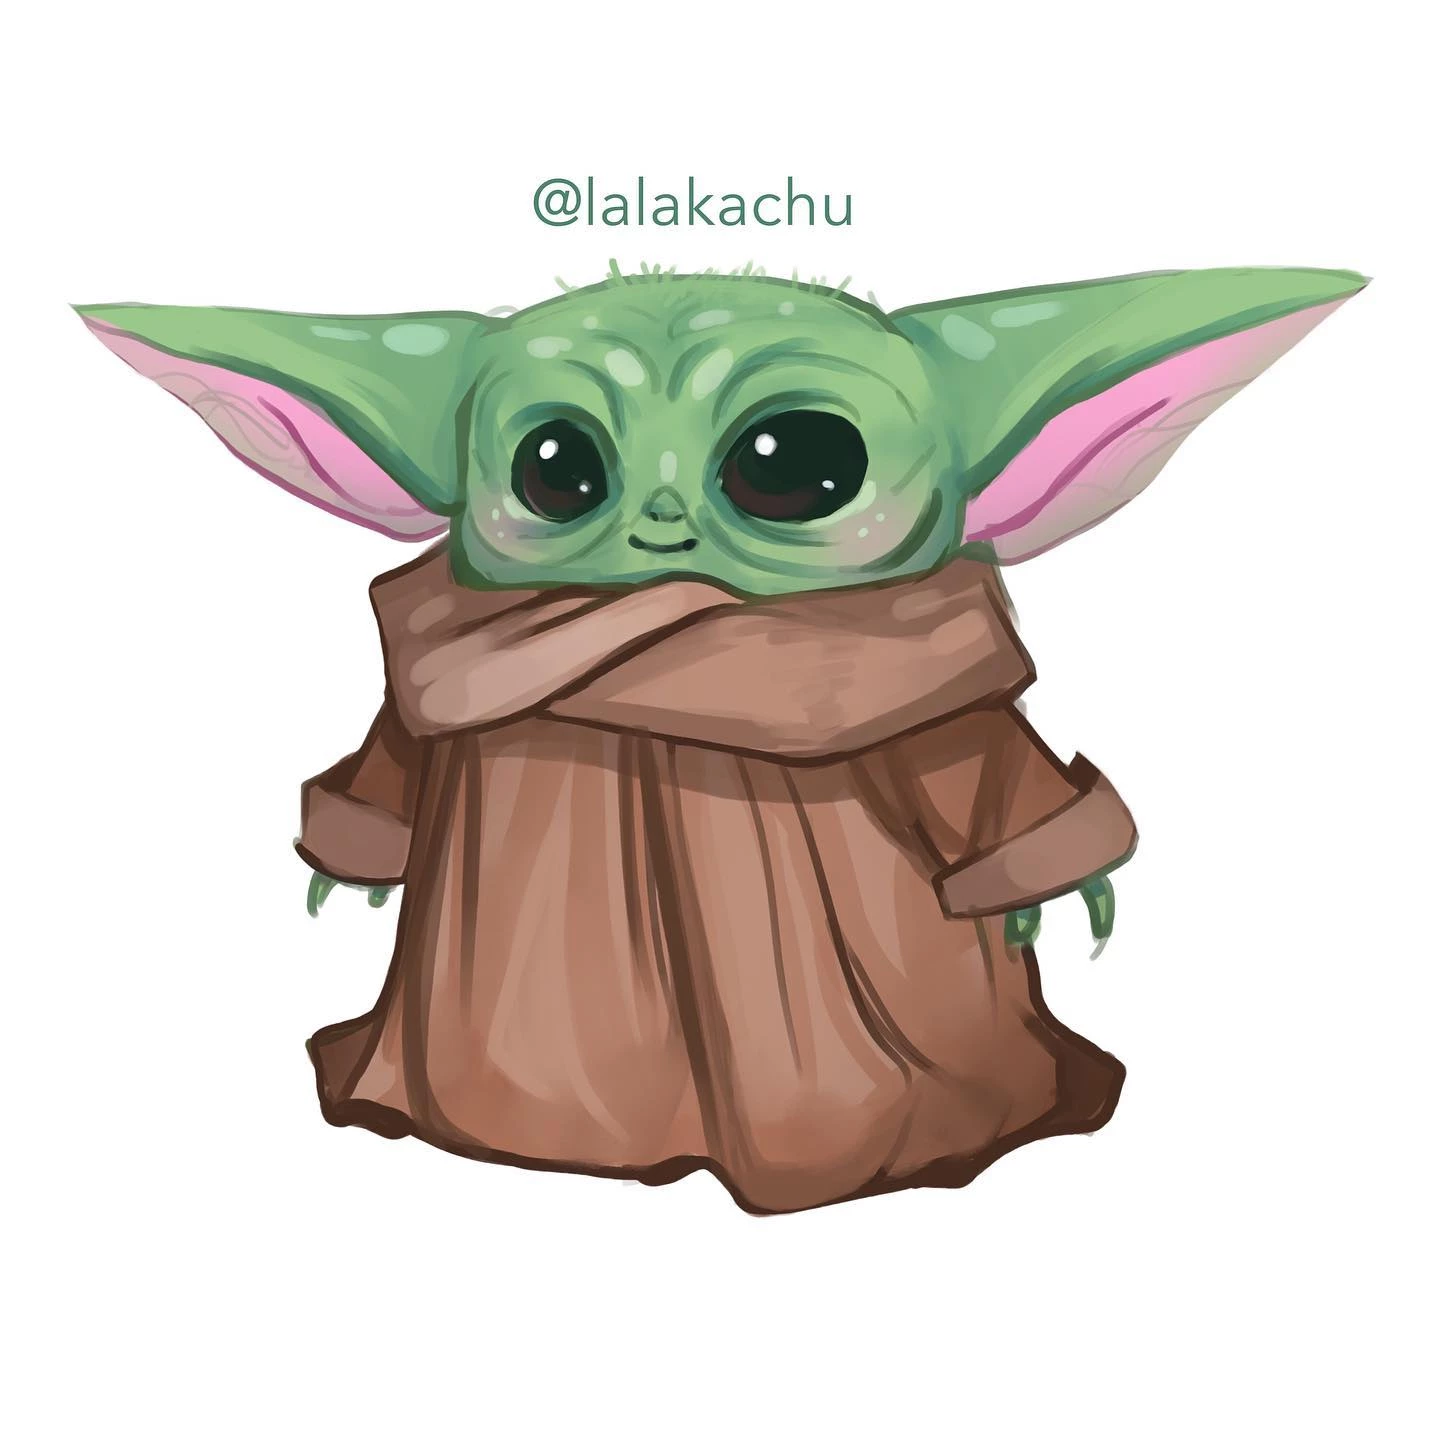 Baby Yoda Is Also Here To Join The Fun